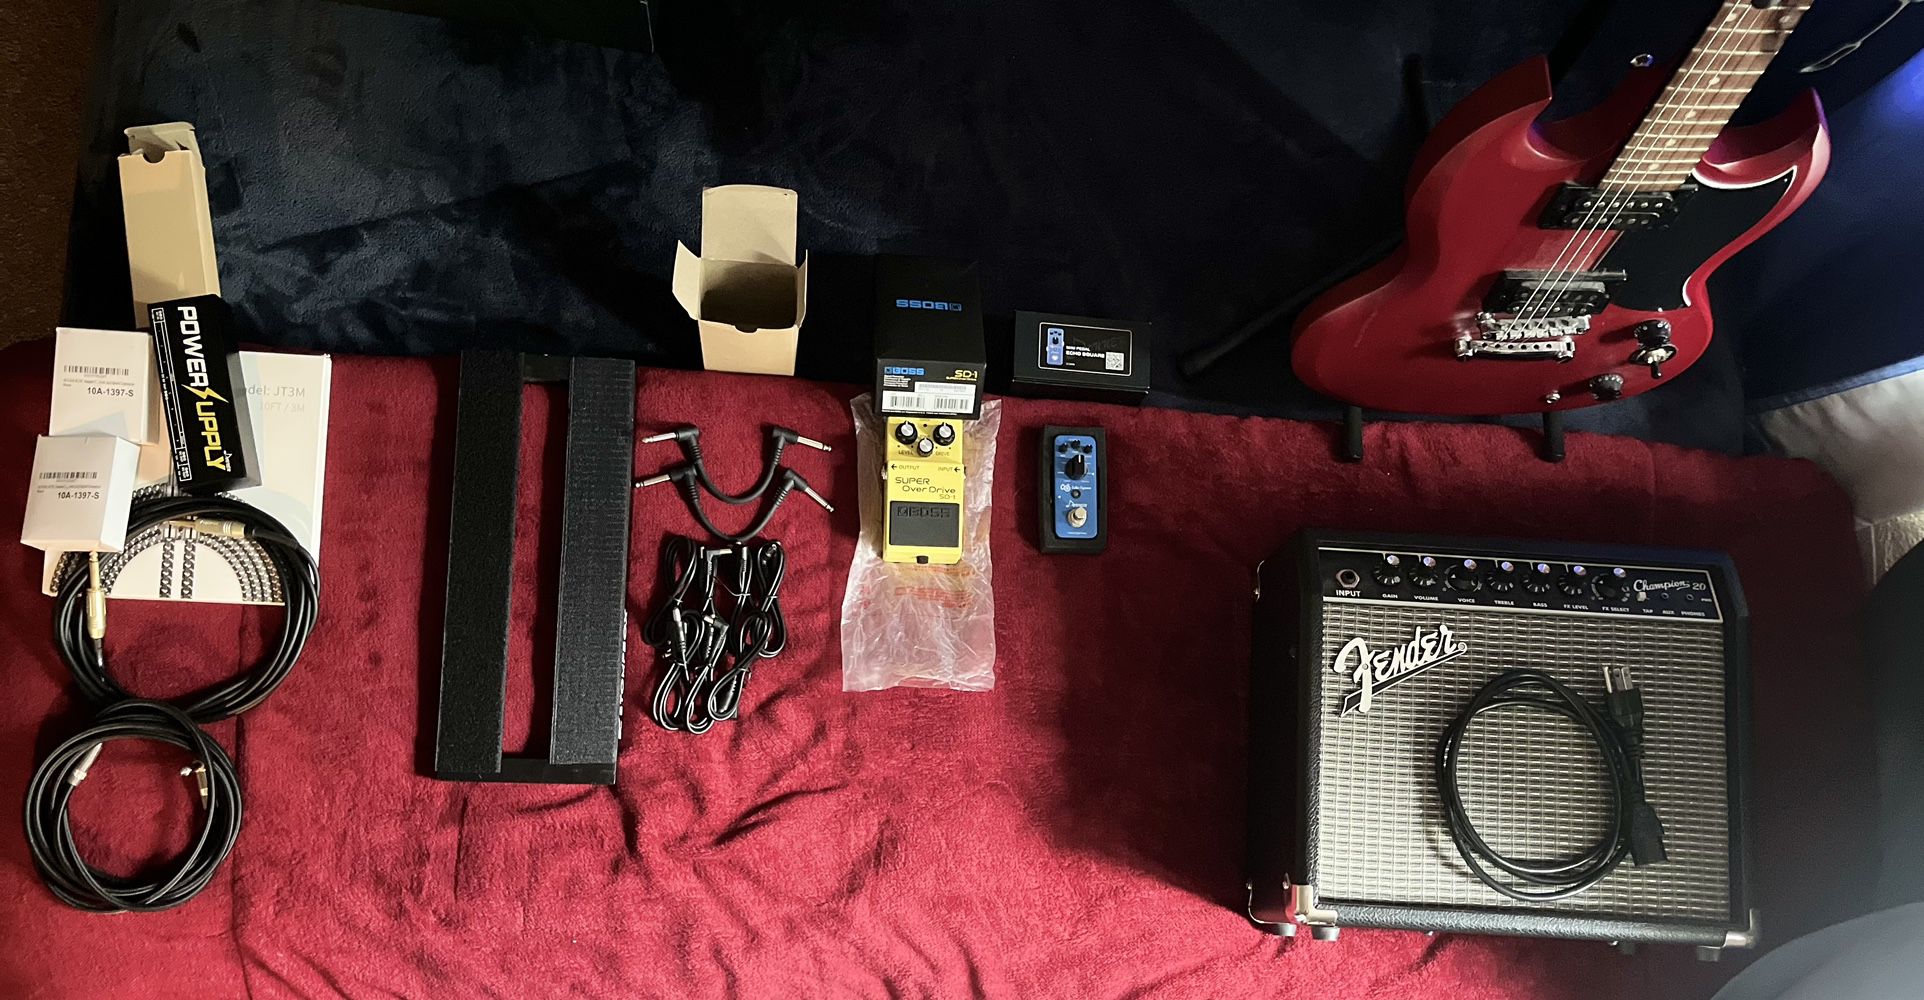 Electric Guitar And Equipment For Sale!